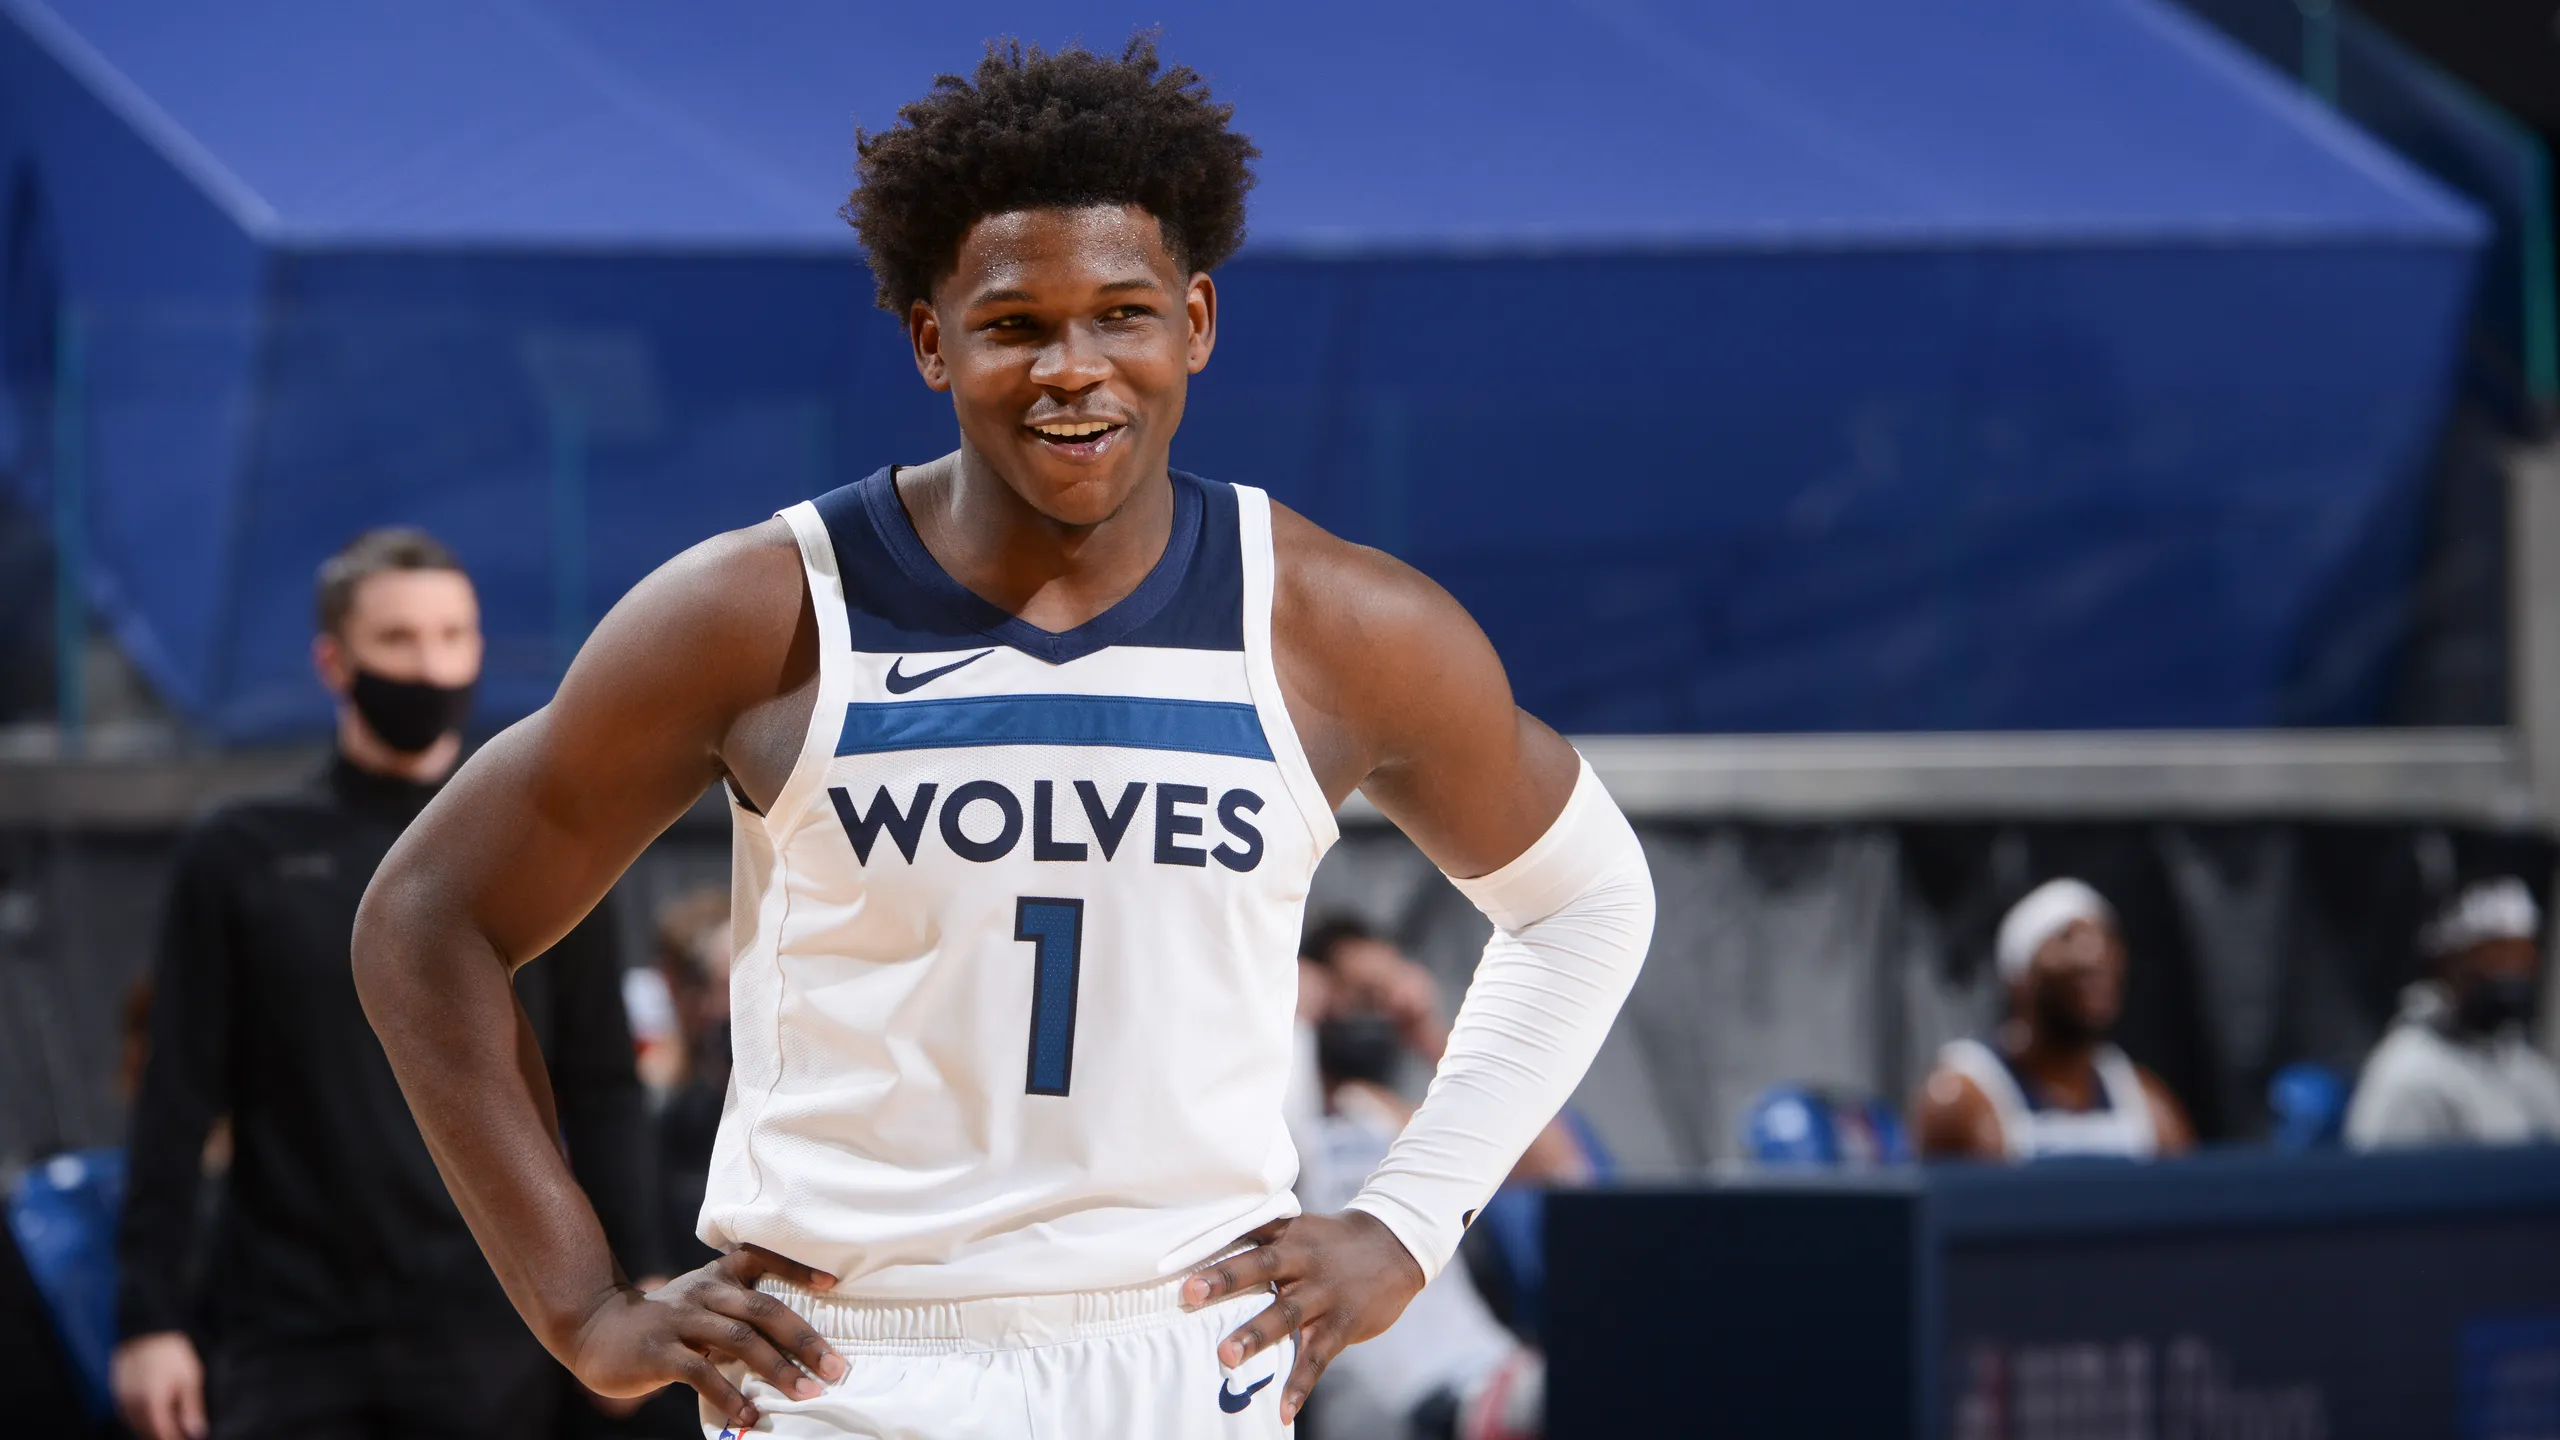 Anthony Edwards Stuns with 44 Points: How His 'Bad Man' Game Shapes the Timberwolves' Playoff Journey